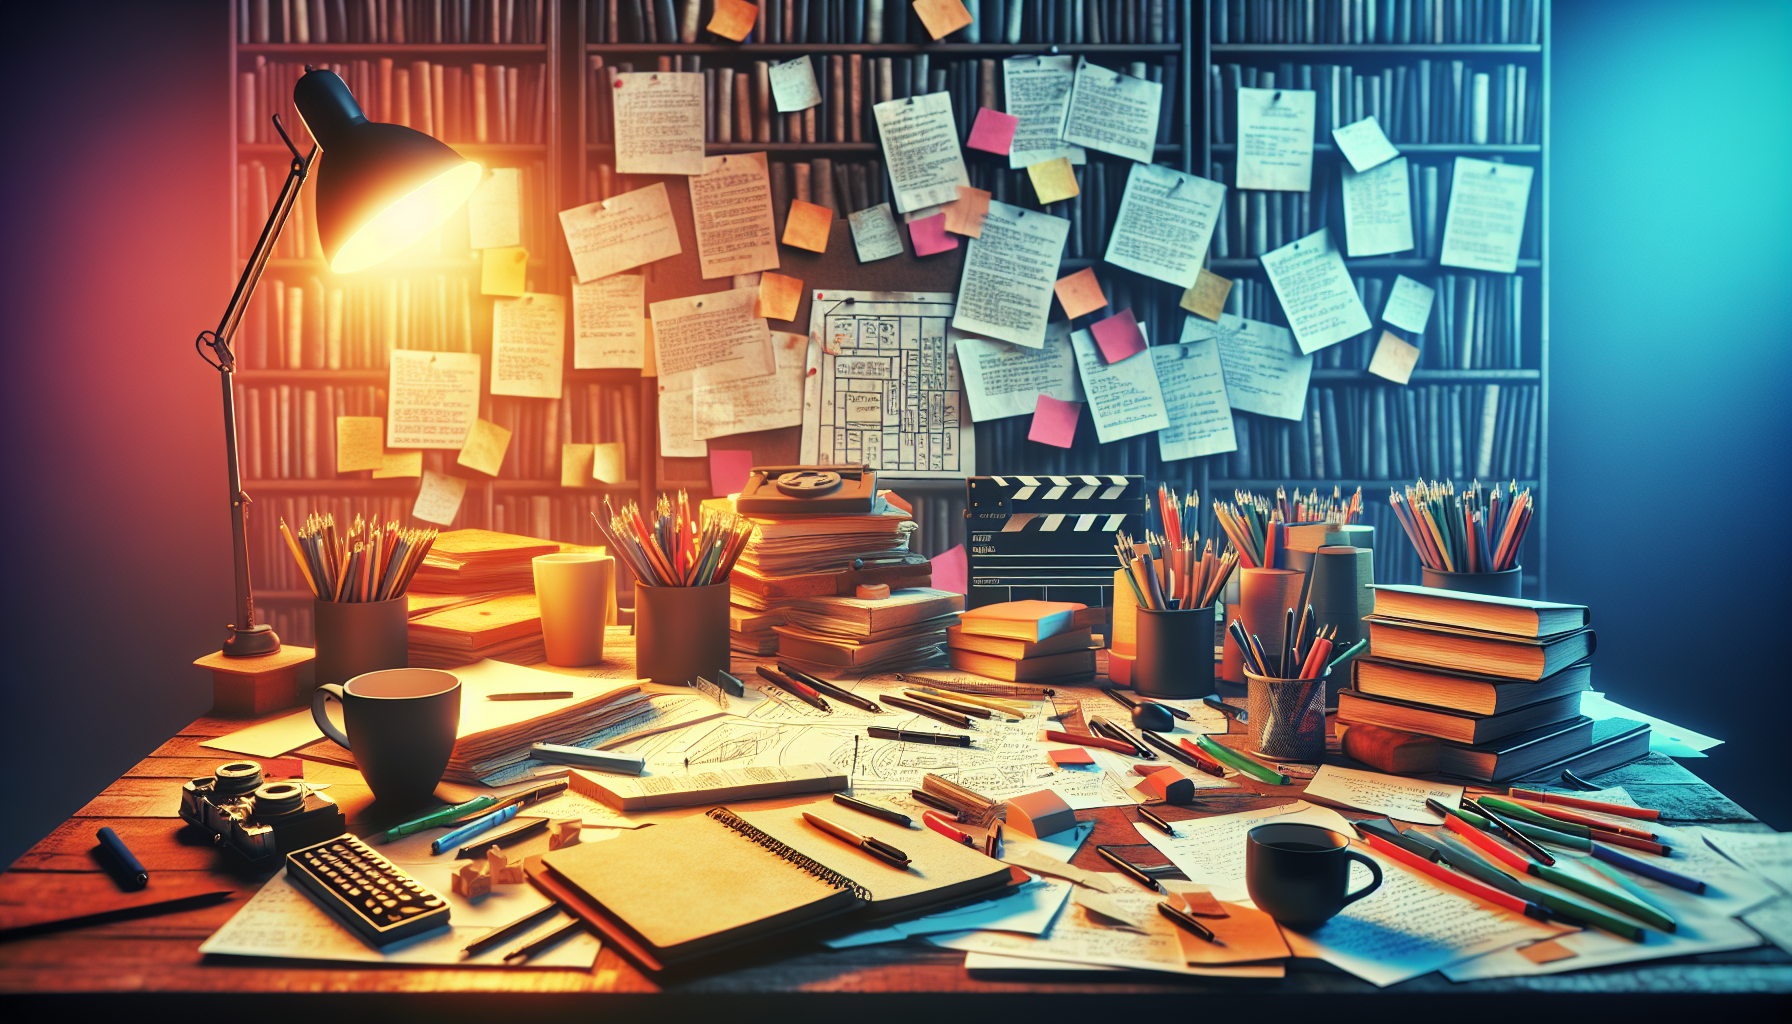 Create an image of a writer's desk cluttered with notepads, pens, and coffee cups, illuminated by a warm desk lamp. Papers with handwritten notes and a storyboard outline are scattered around, showcasing the intricate process of screenwriting. The background shows shelves filled with classic film scripts and a movie poster, celebrating the art and craft of storytelling in cinema.